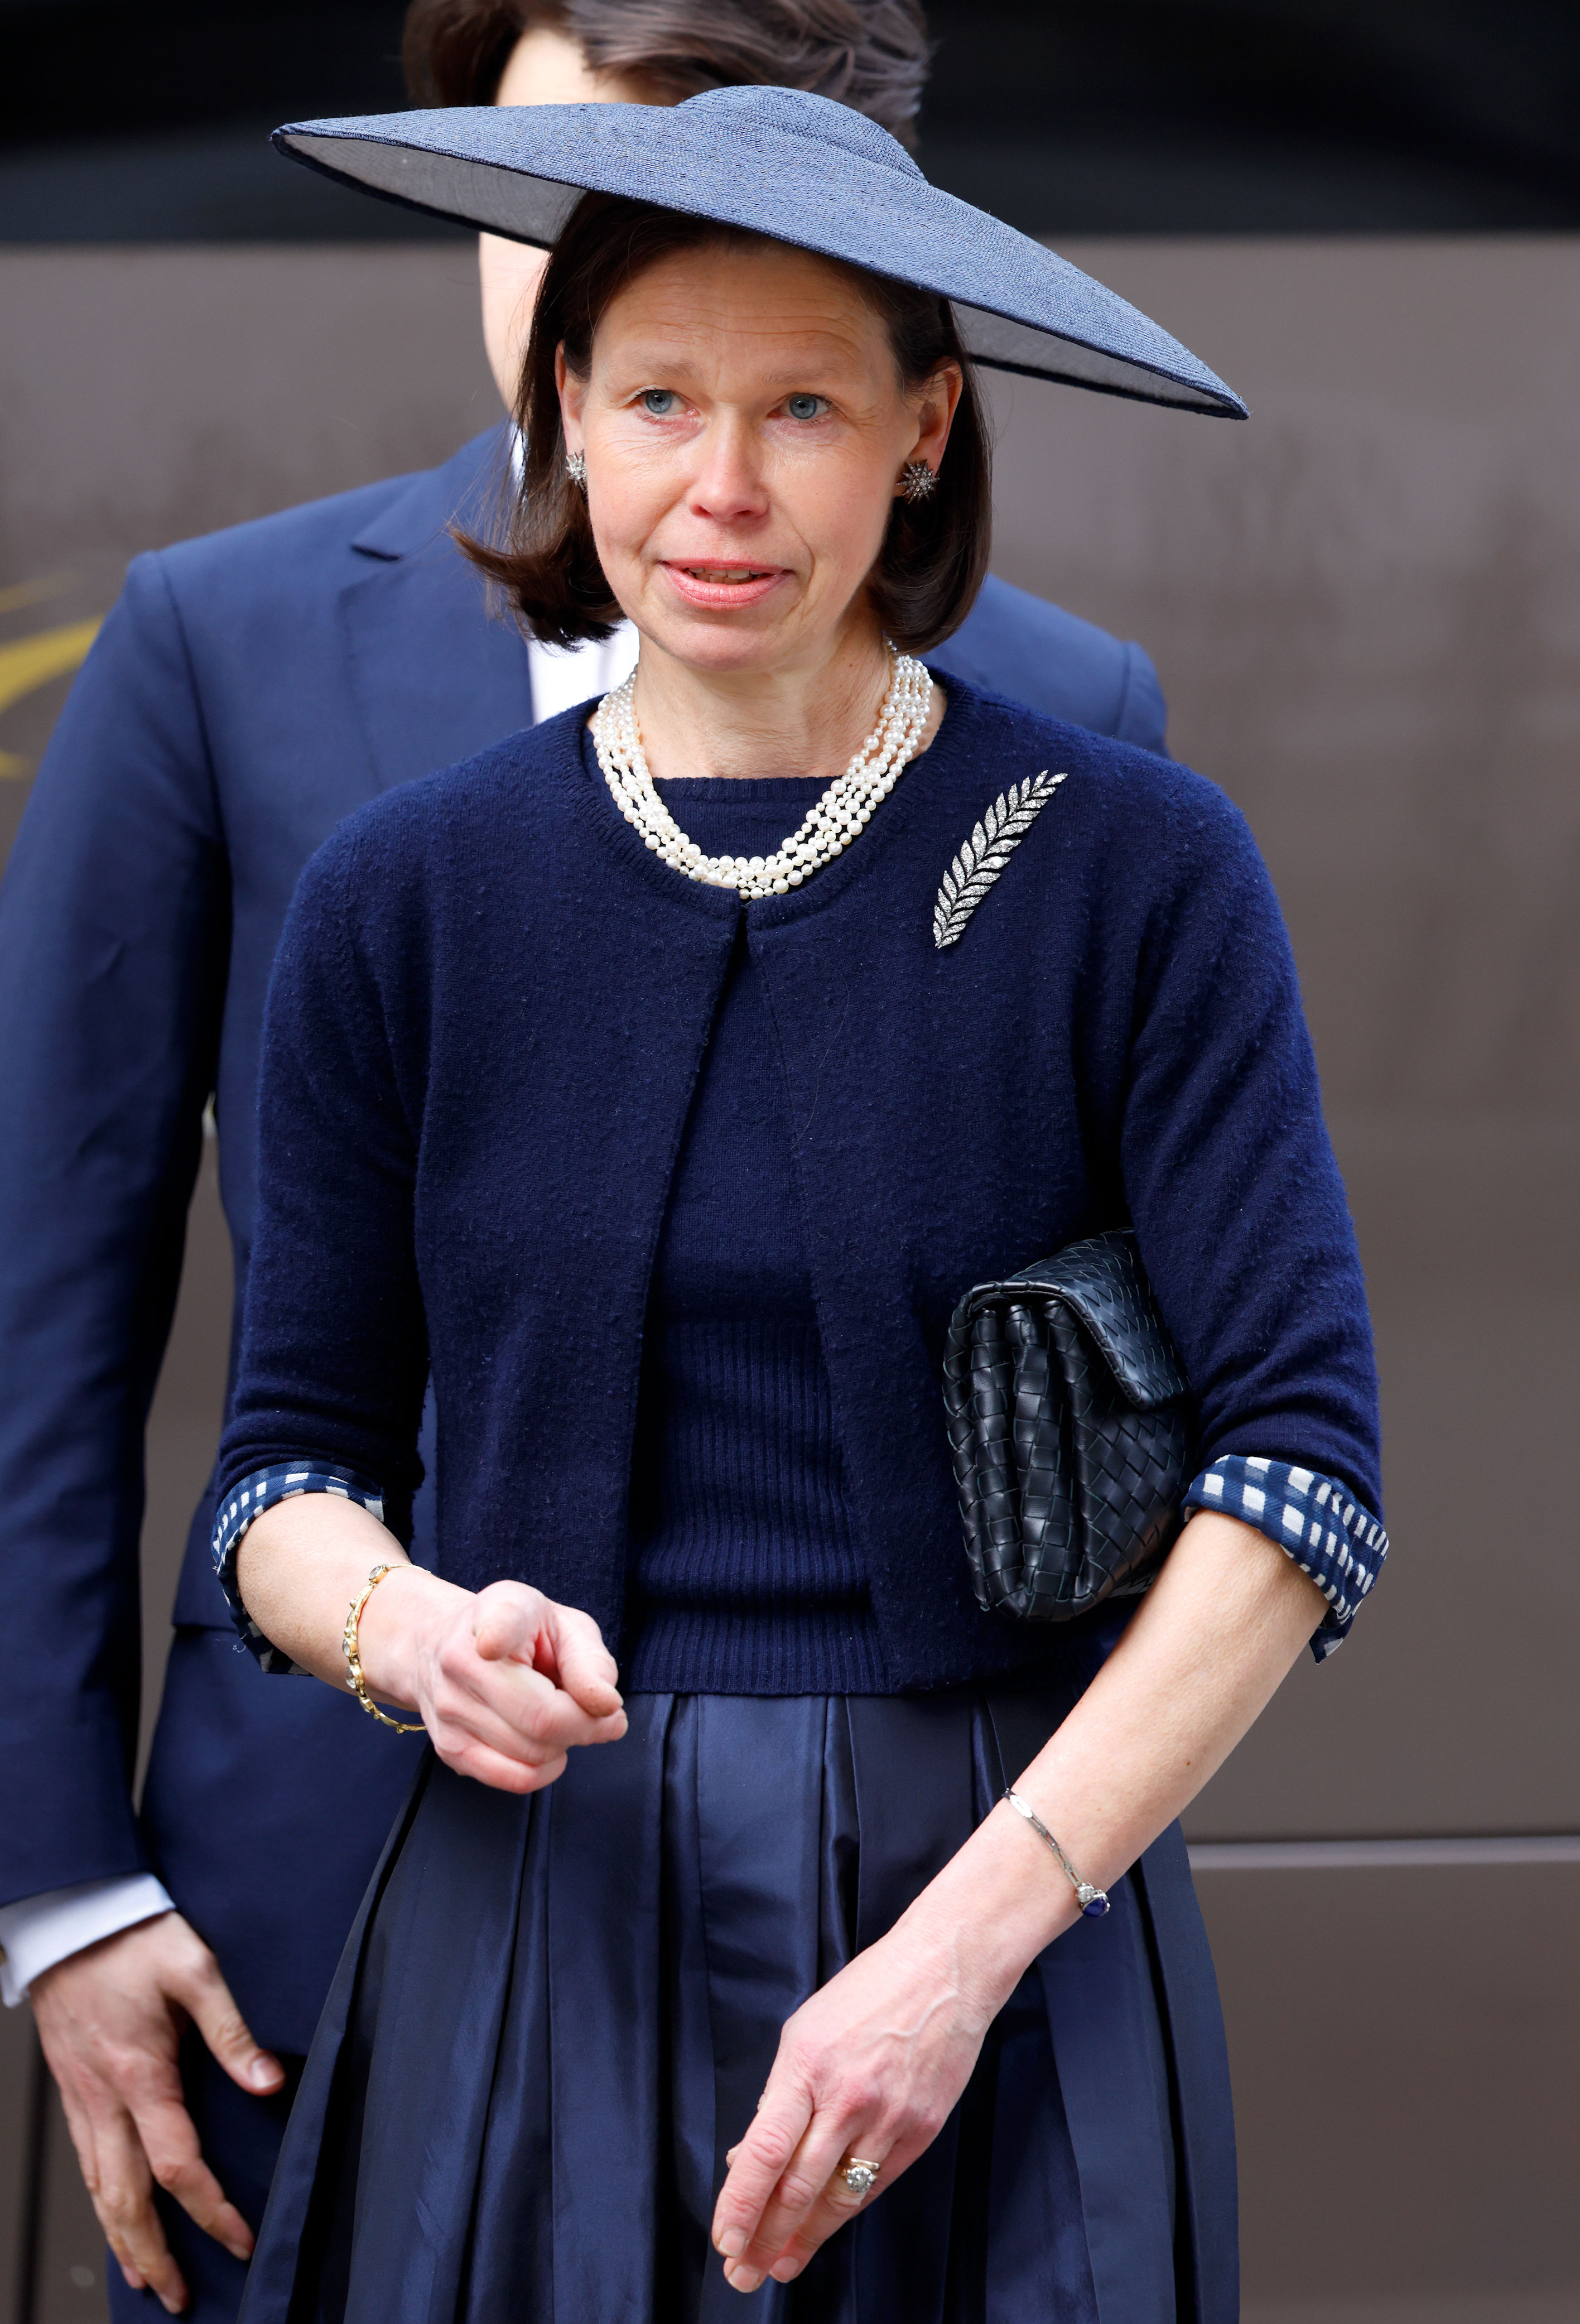 <p>Princess Margaret's daughter, Lady Sarah Chatto, is in the 28th spot. As the niece of Queen Elizabeth II and the sister of David Armstrong-Jones, Sarah experienced all the pomp and circumstance that came with growing up in the inner circle of the royal family. However, as an adult, Sarah has chosen to live a more low-key life out of the spotlight. Even though she's a lesser-known royal, she is still quite close to her aristocratic family. </p>